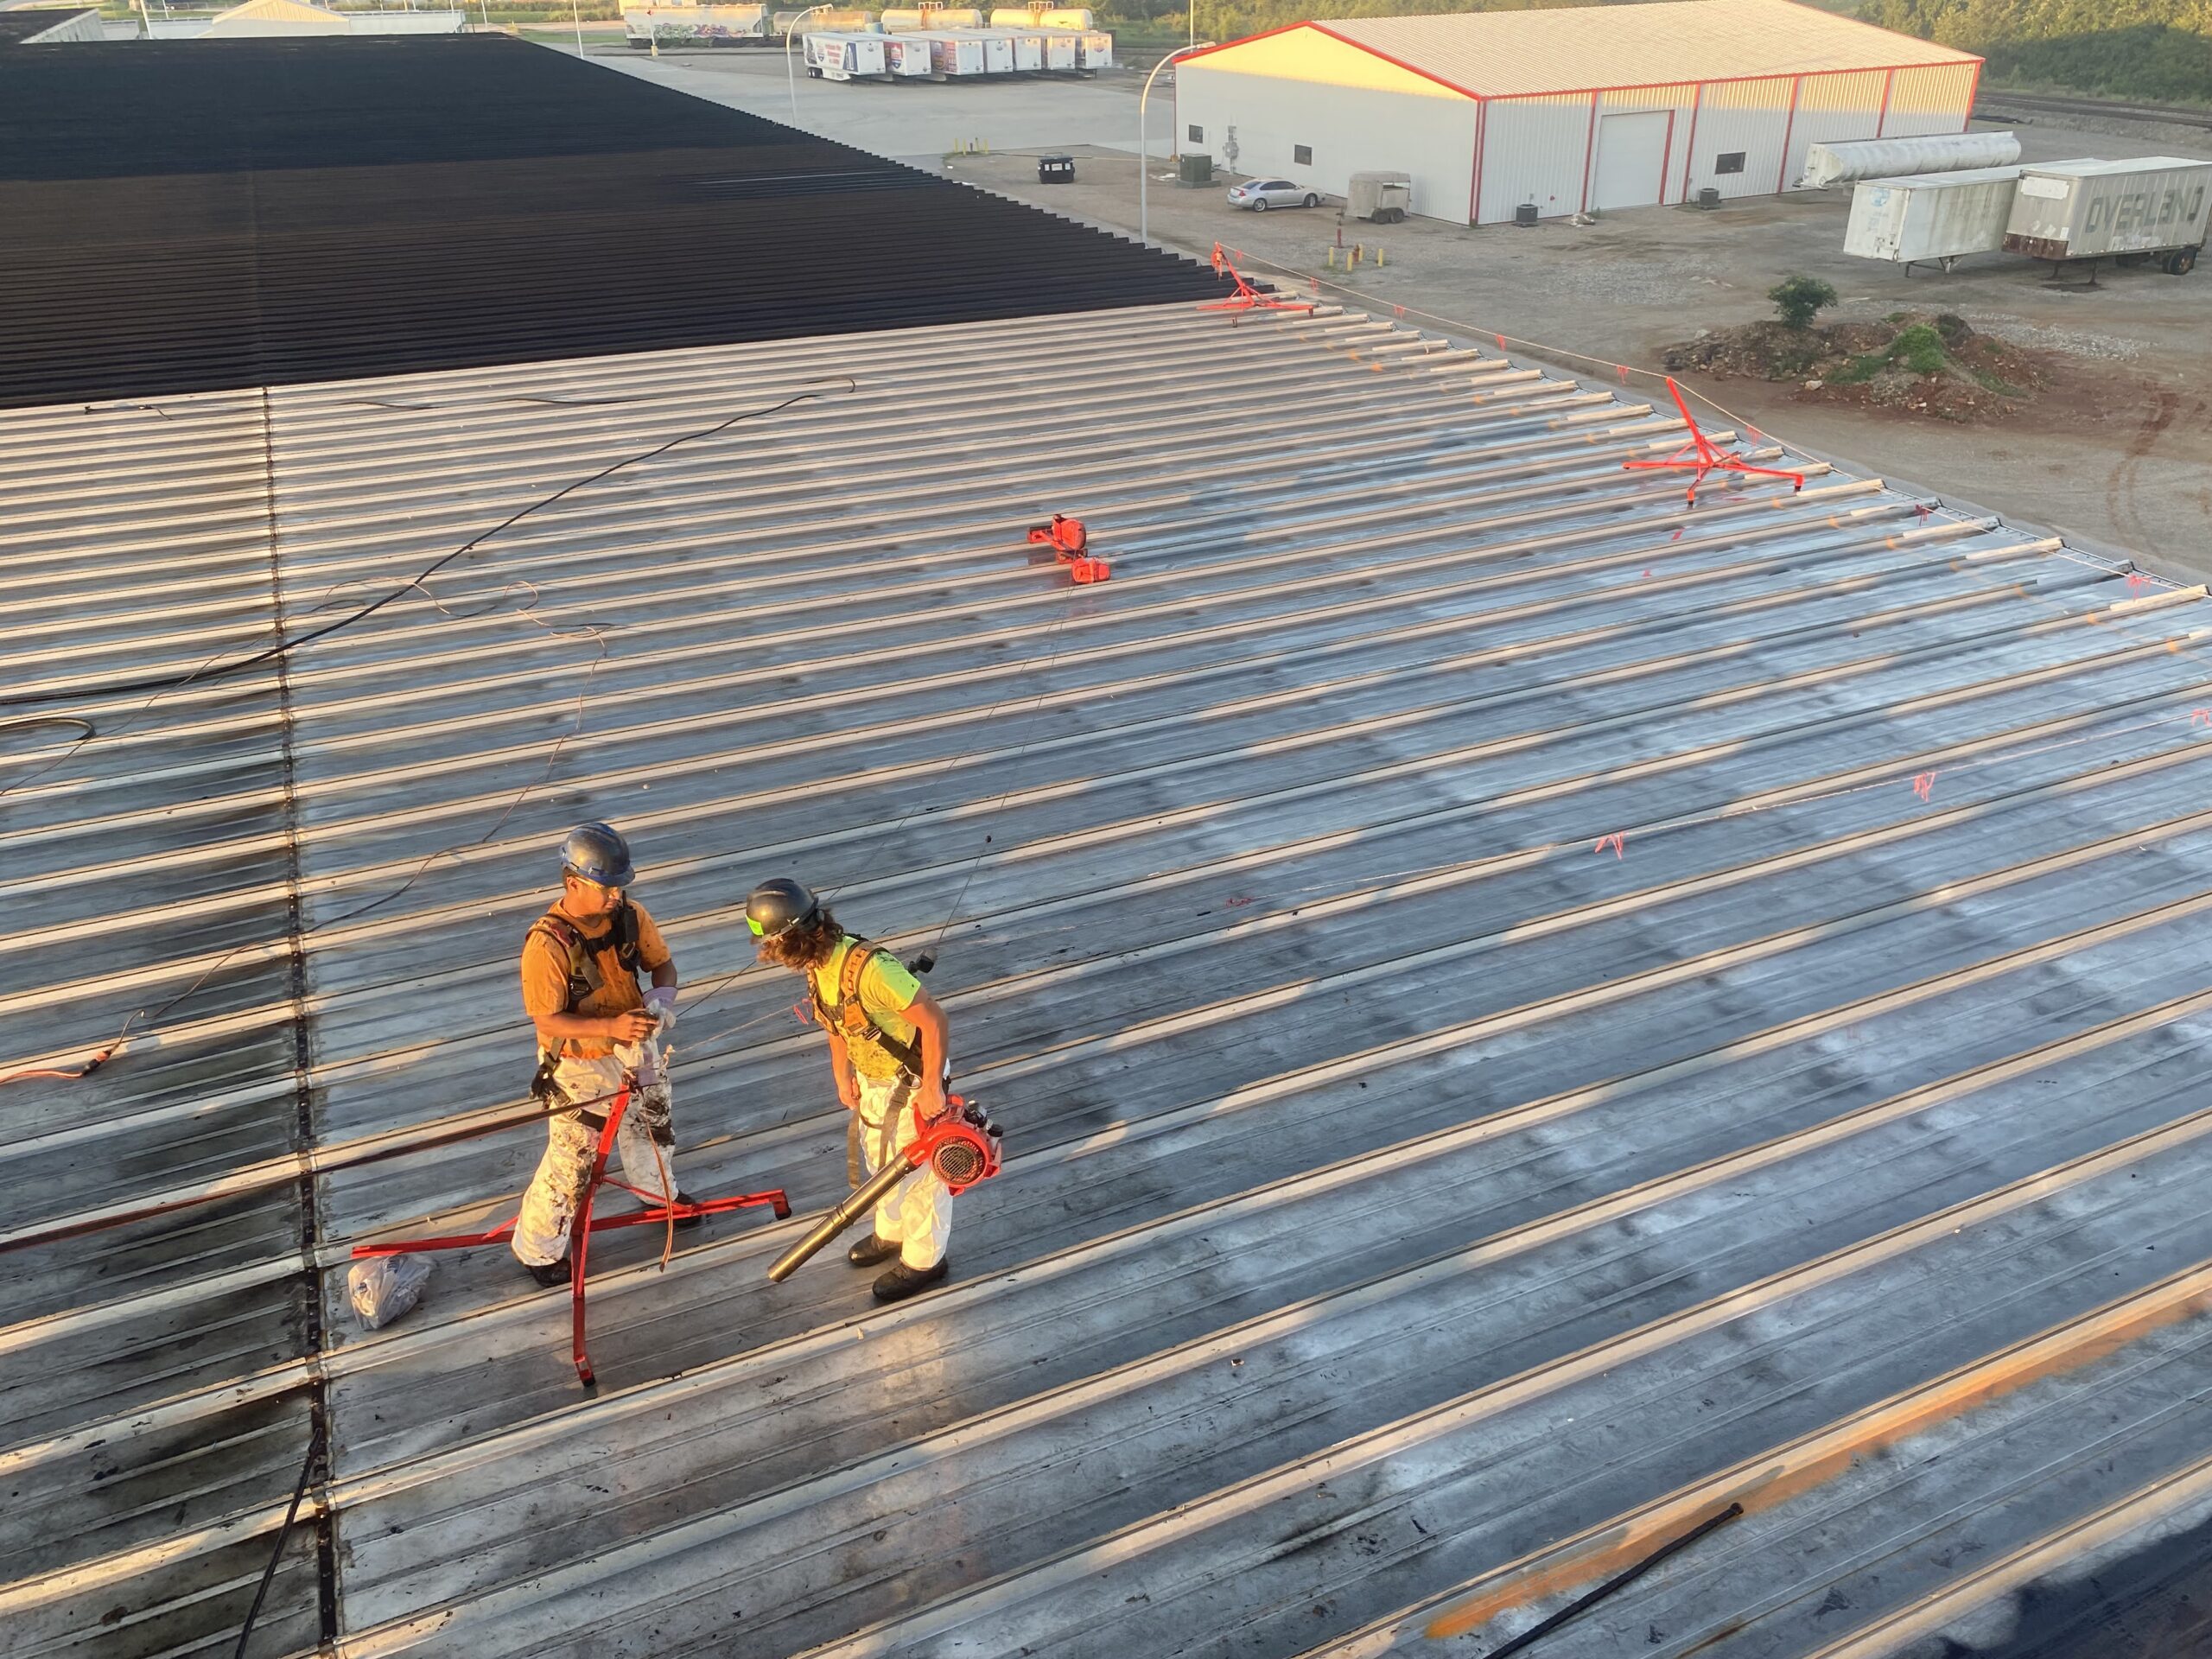 Thermal-Tec metal roof specialists work on a commercial metal roof.